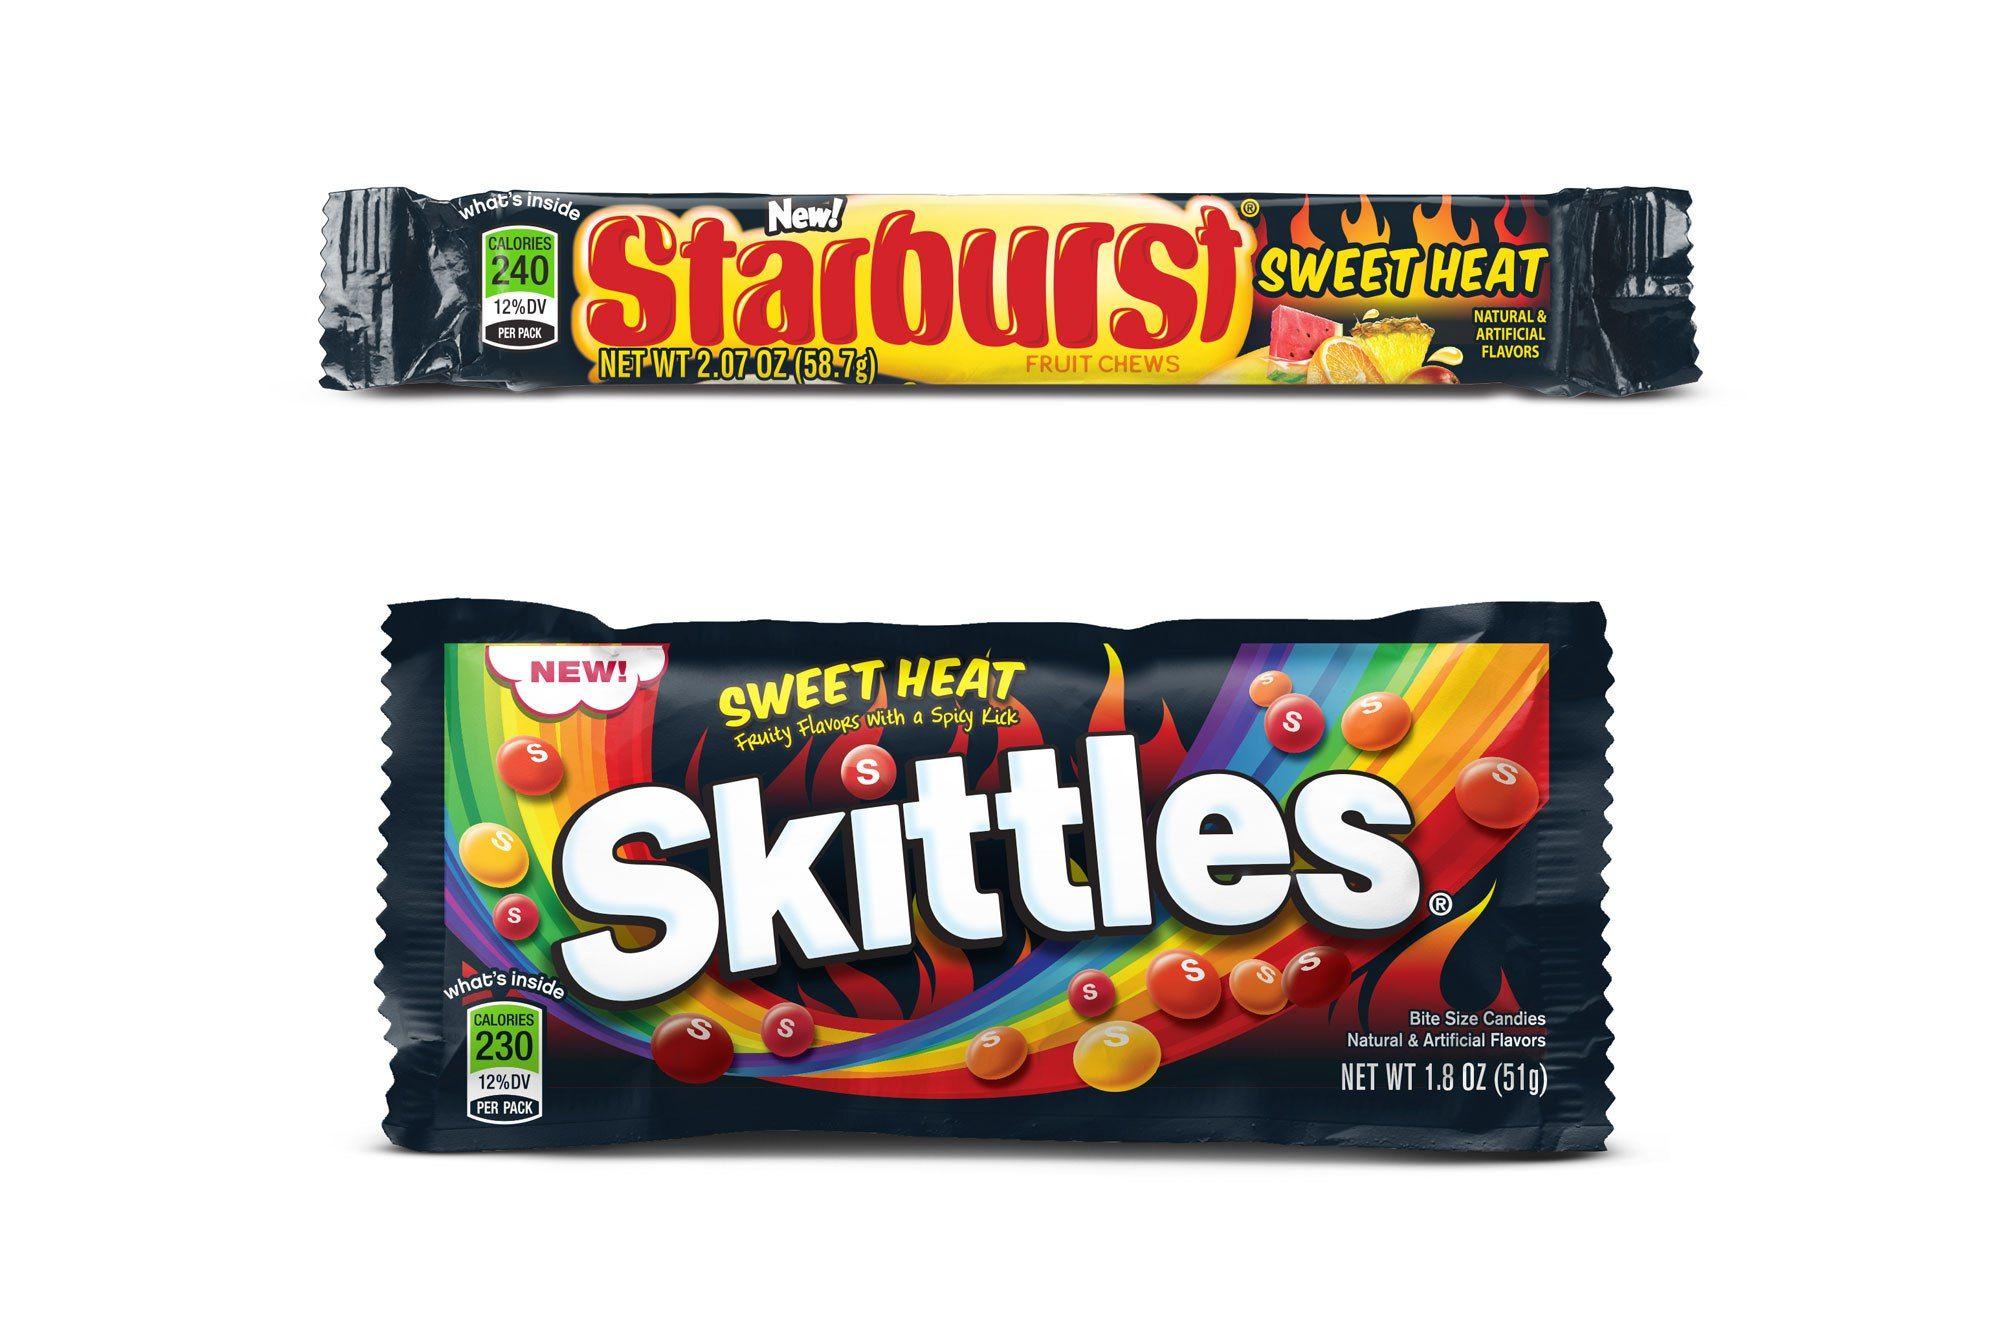 Spicy Skittles and Starburst Are Coming This Winter